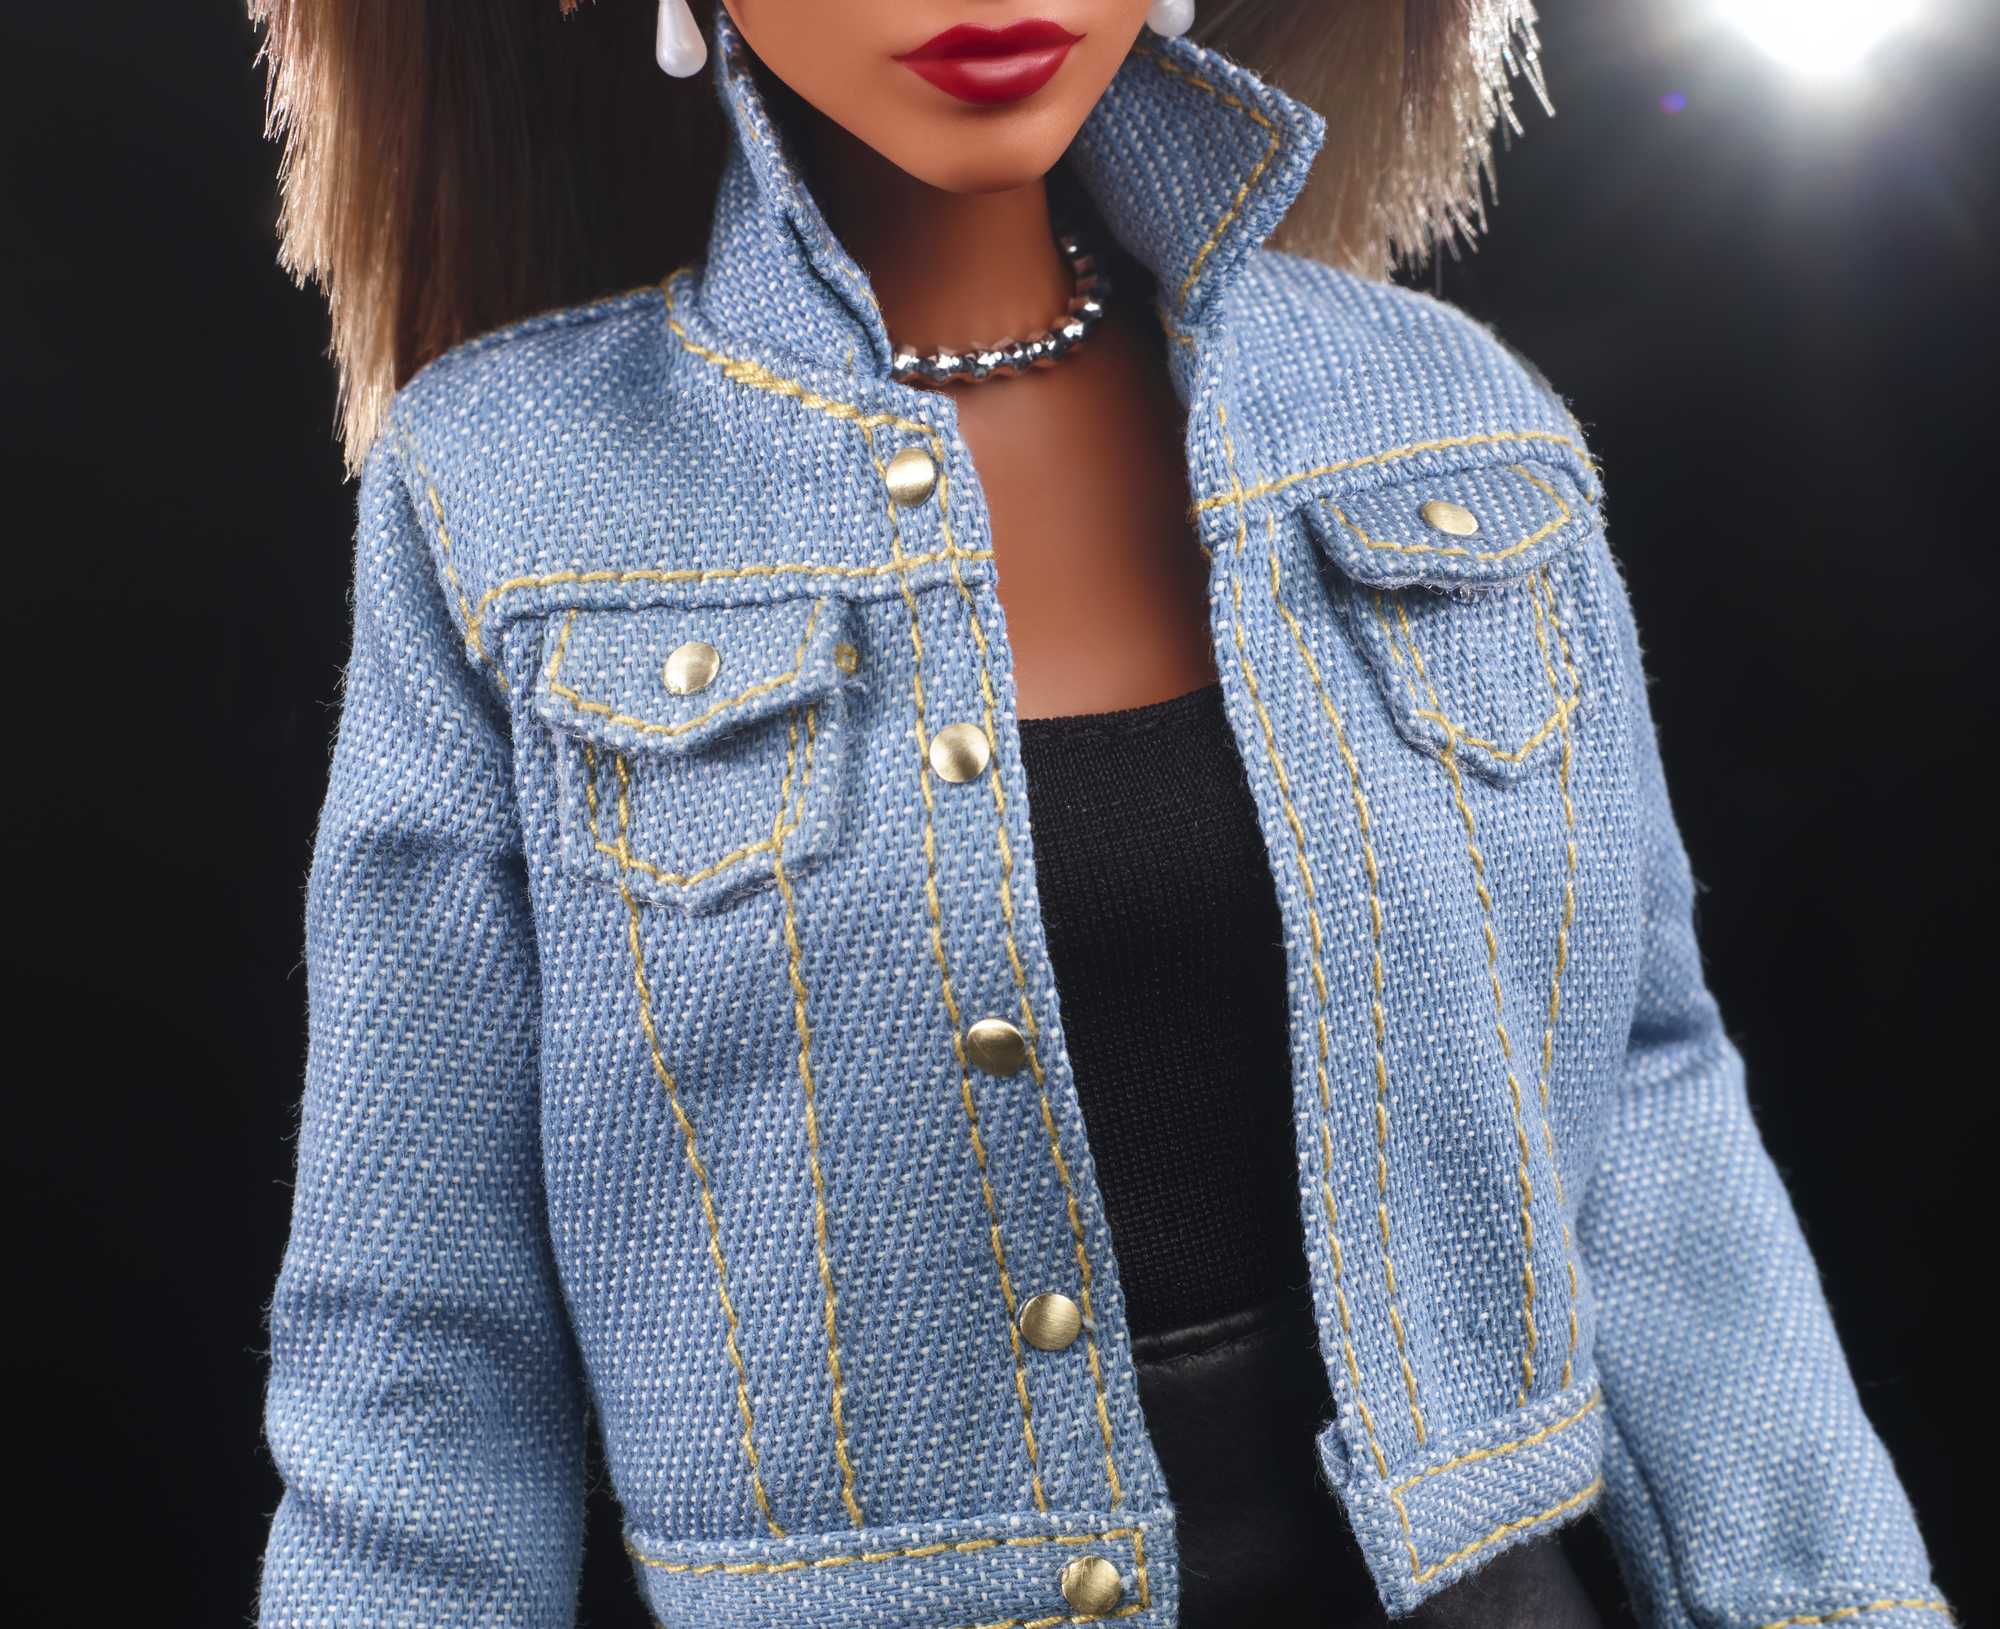 Barbie Signature Tina Turner Barbie Doll in ‘90s Fashion, Gift for Collectors - image 5 of 7